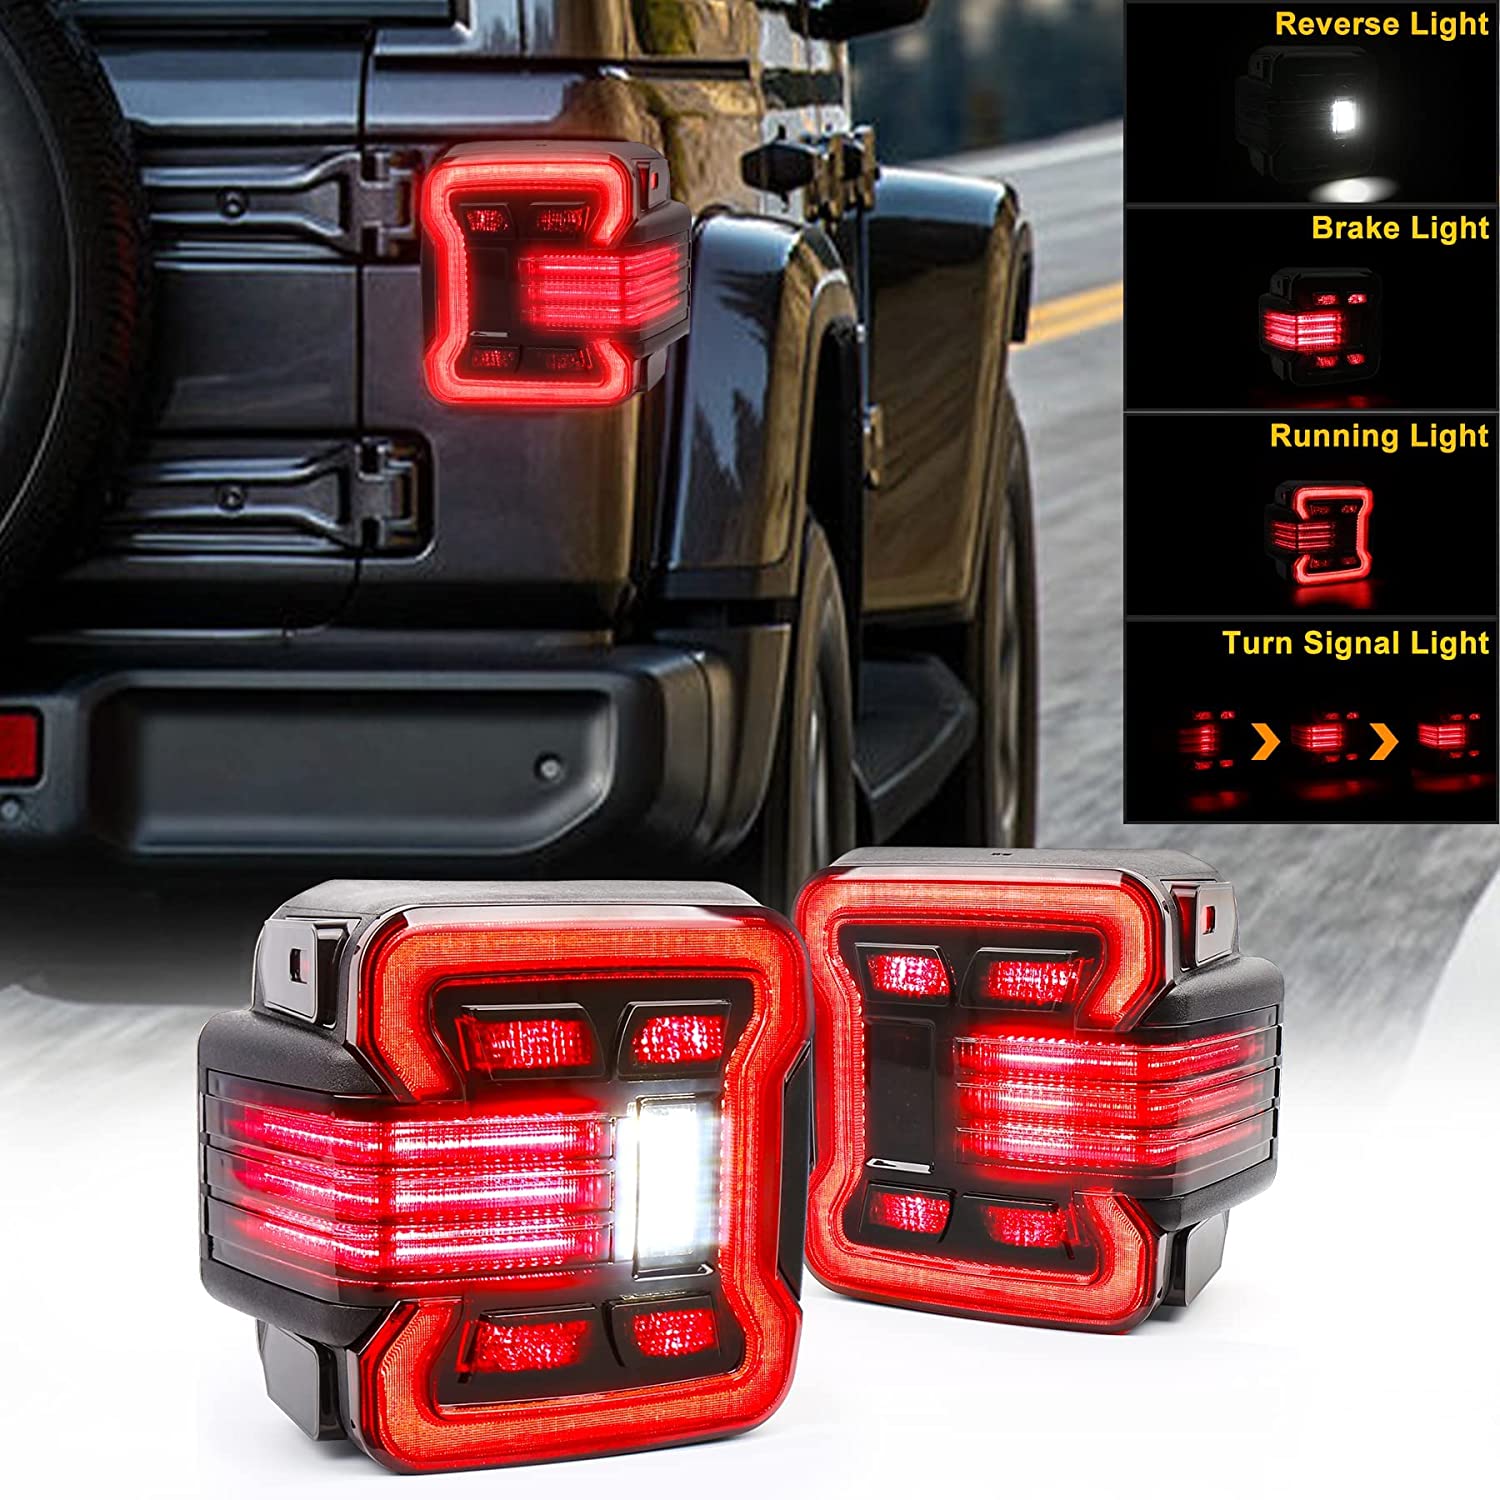 JK Tail Lights, MOVOTOR Smoked Lens LED Tail Lights with Brake Turn Signal Reverse Running Welcome Light Compatible with Jeep Wrangler JK JKU 2007-2018, Built-in EMC